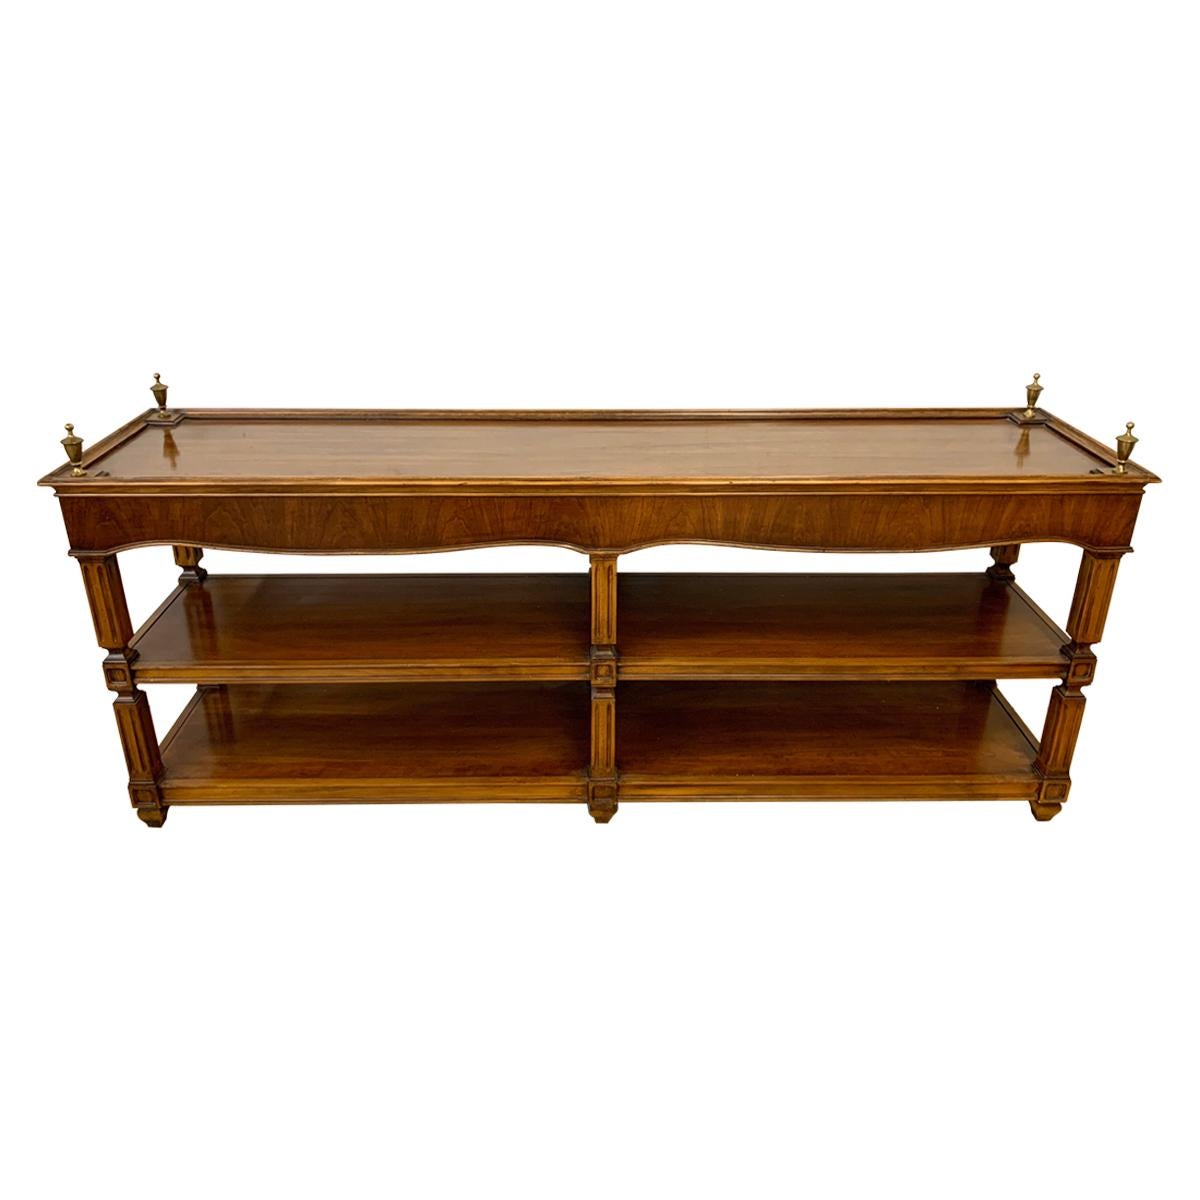 Neoclassical Mahogany Console Table Sofa Table with Shelves